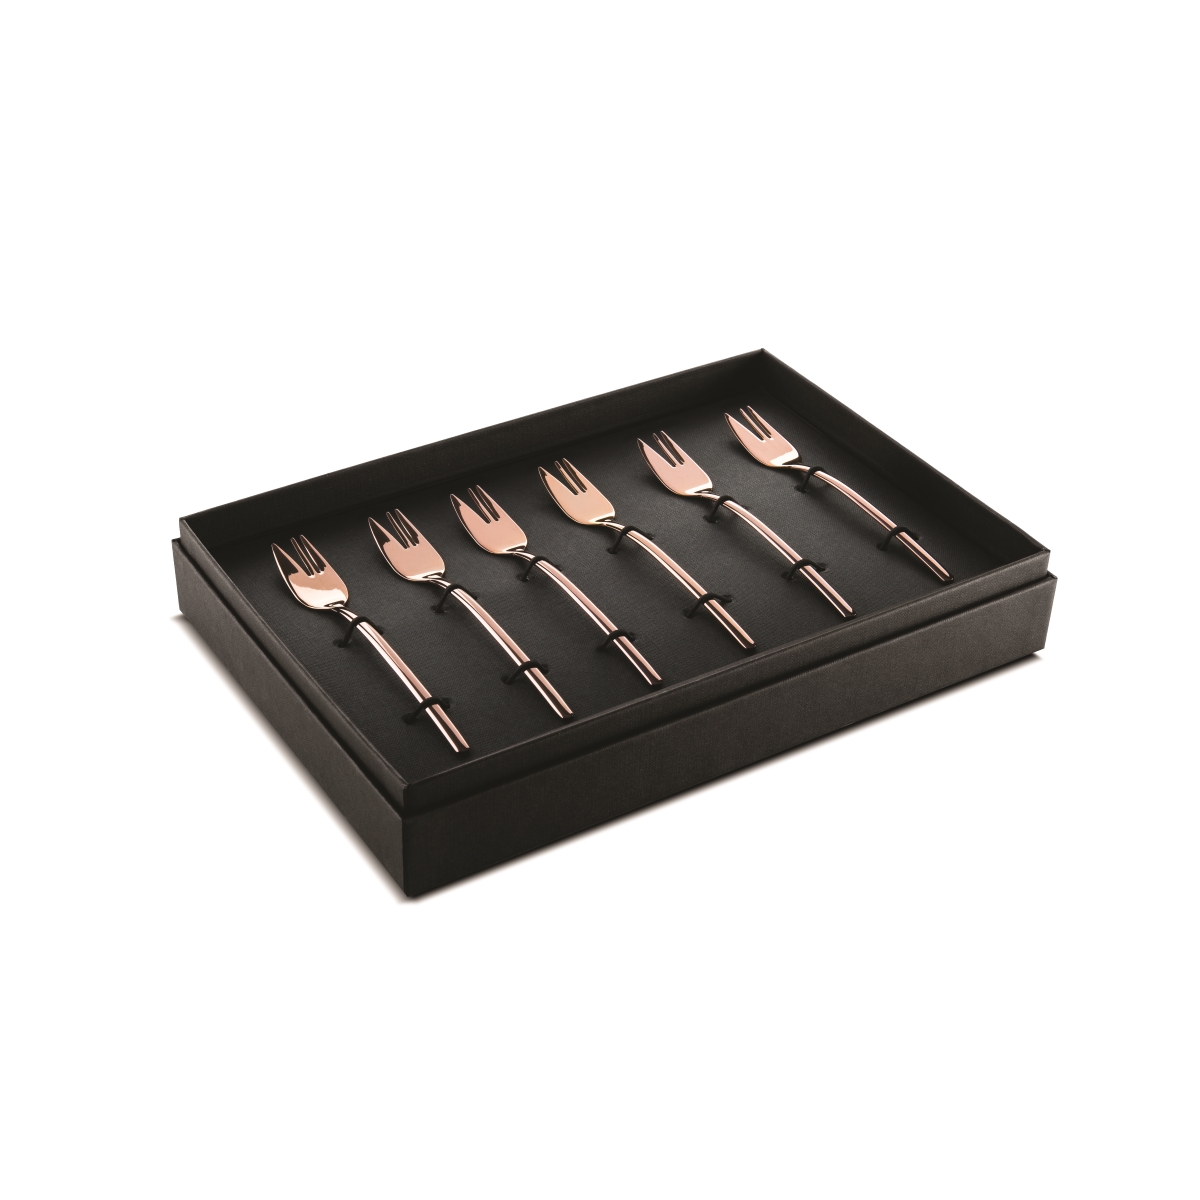 Picture of Mepra 109044115 Due Bronxo Cake Fork Set - 6 Piece